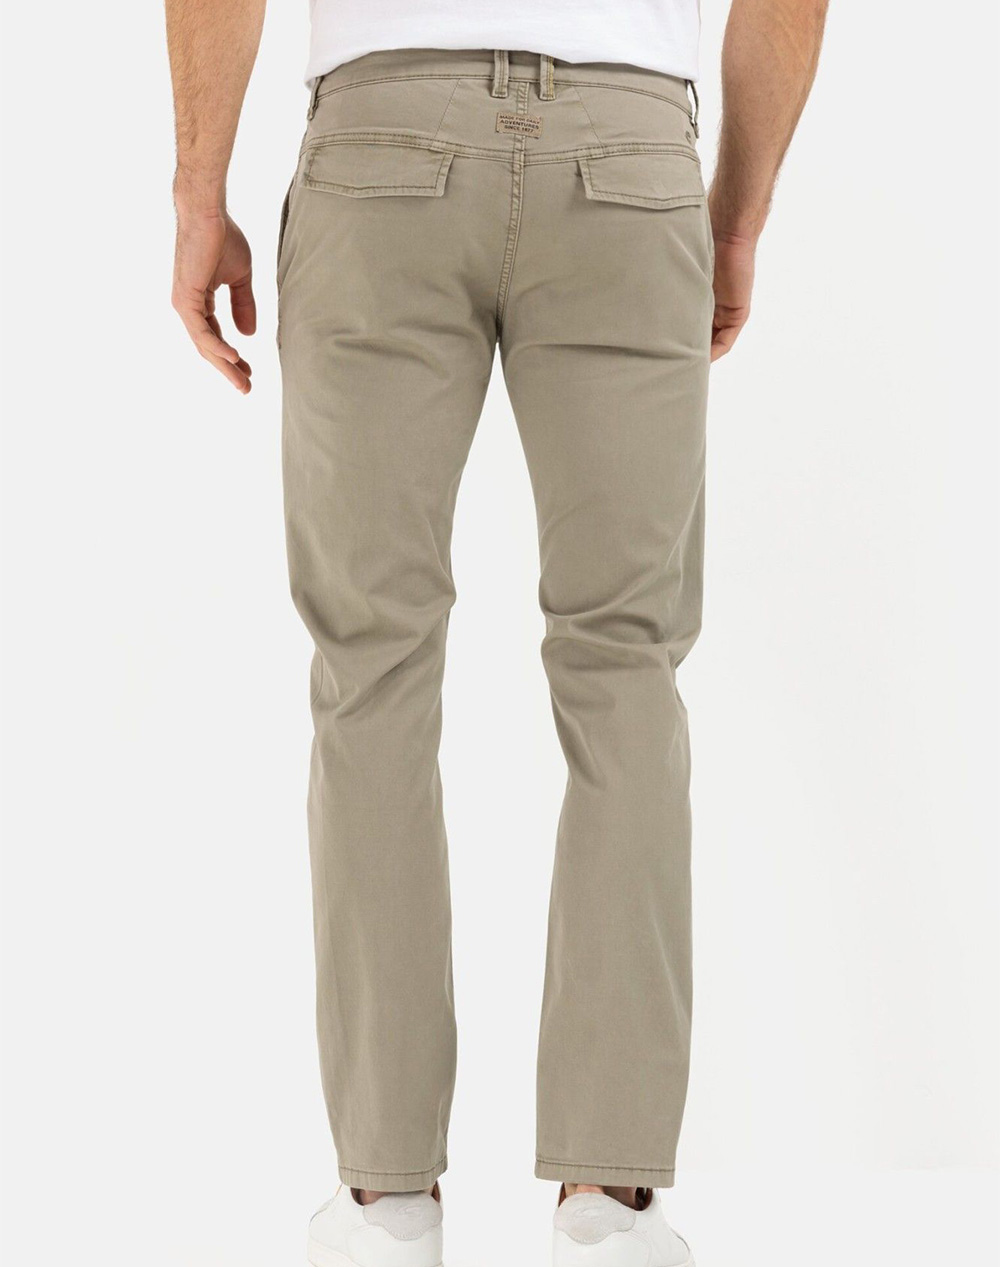 Buy camel active C by camel active Men Cargo Trousers in Relaxed Fit with  Multiple Pockets Navy Blue 300SS22C0848 Online  ZALORA Malaysia